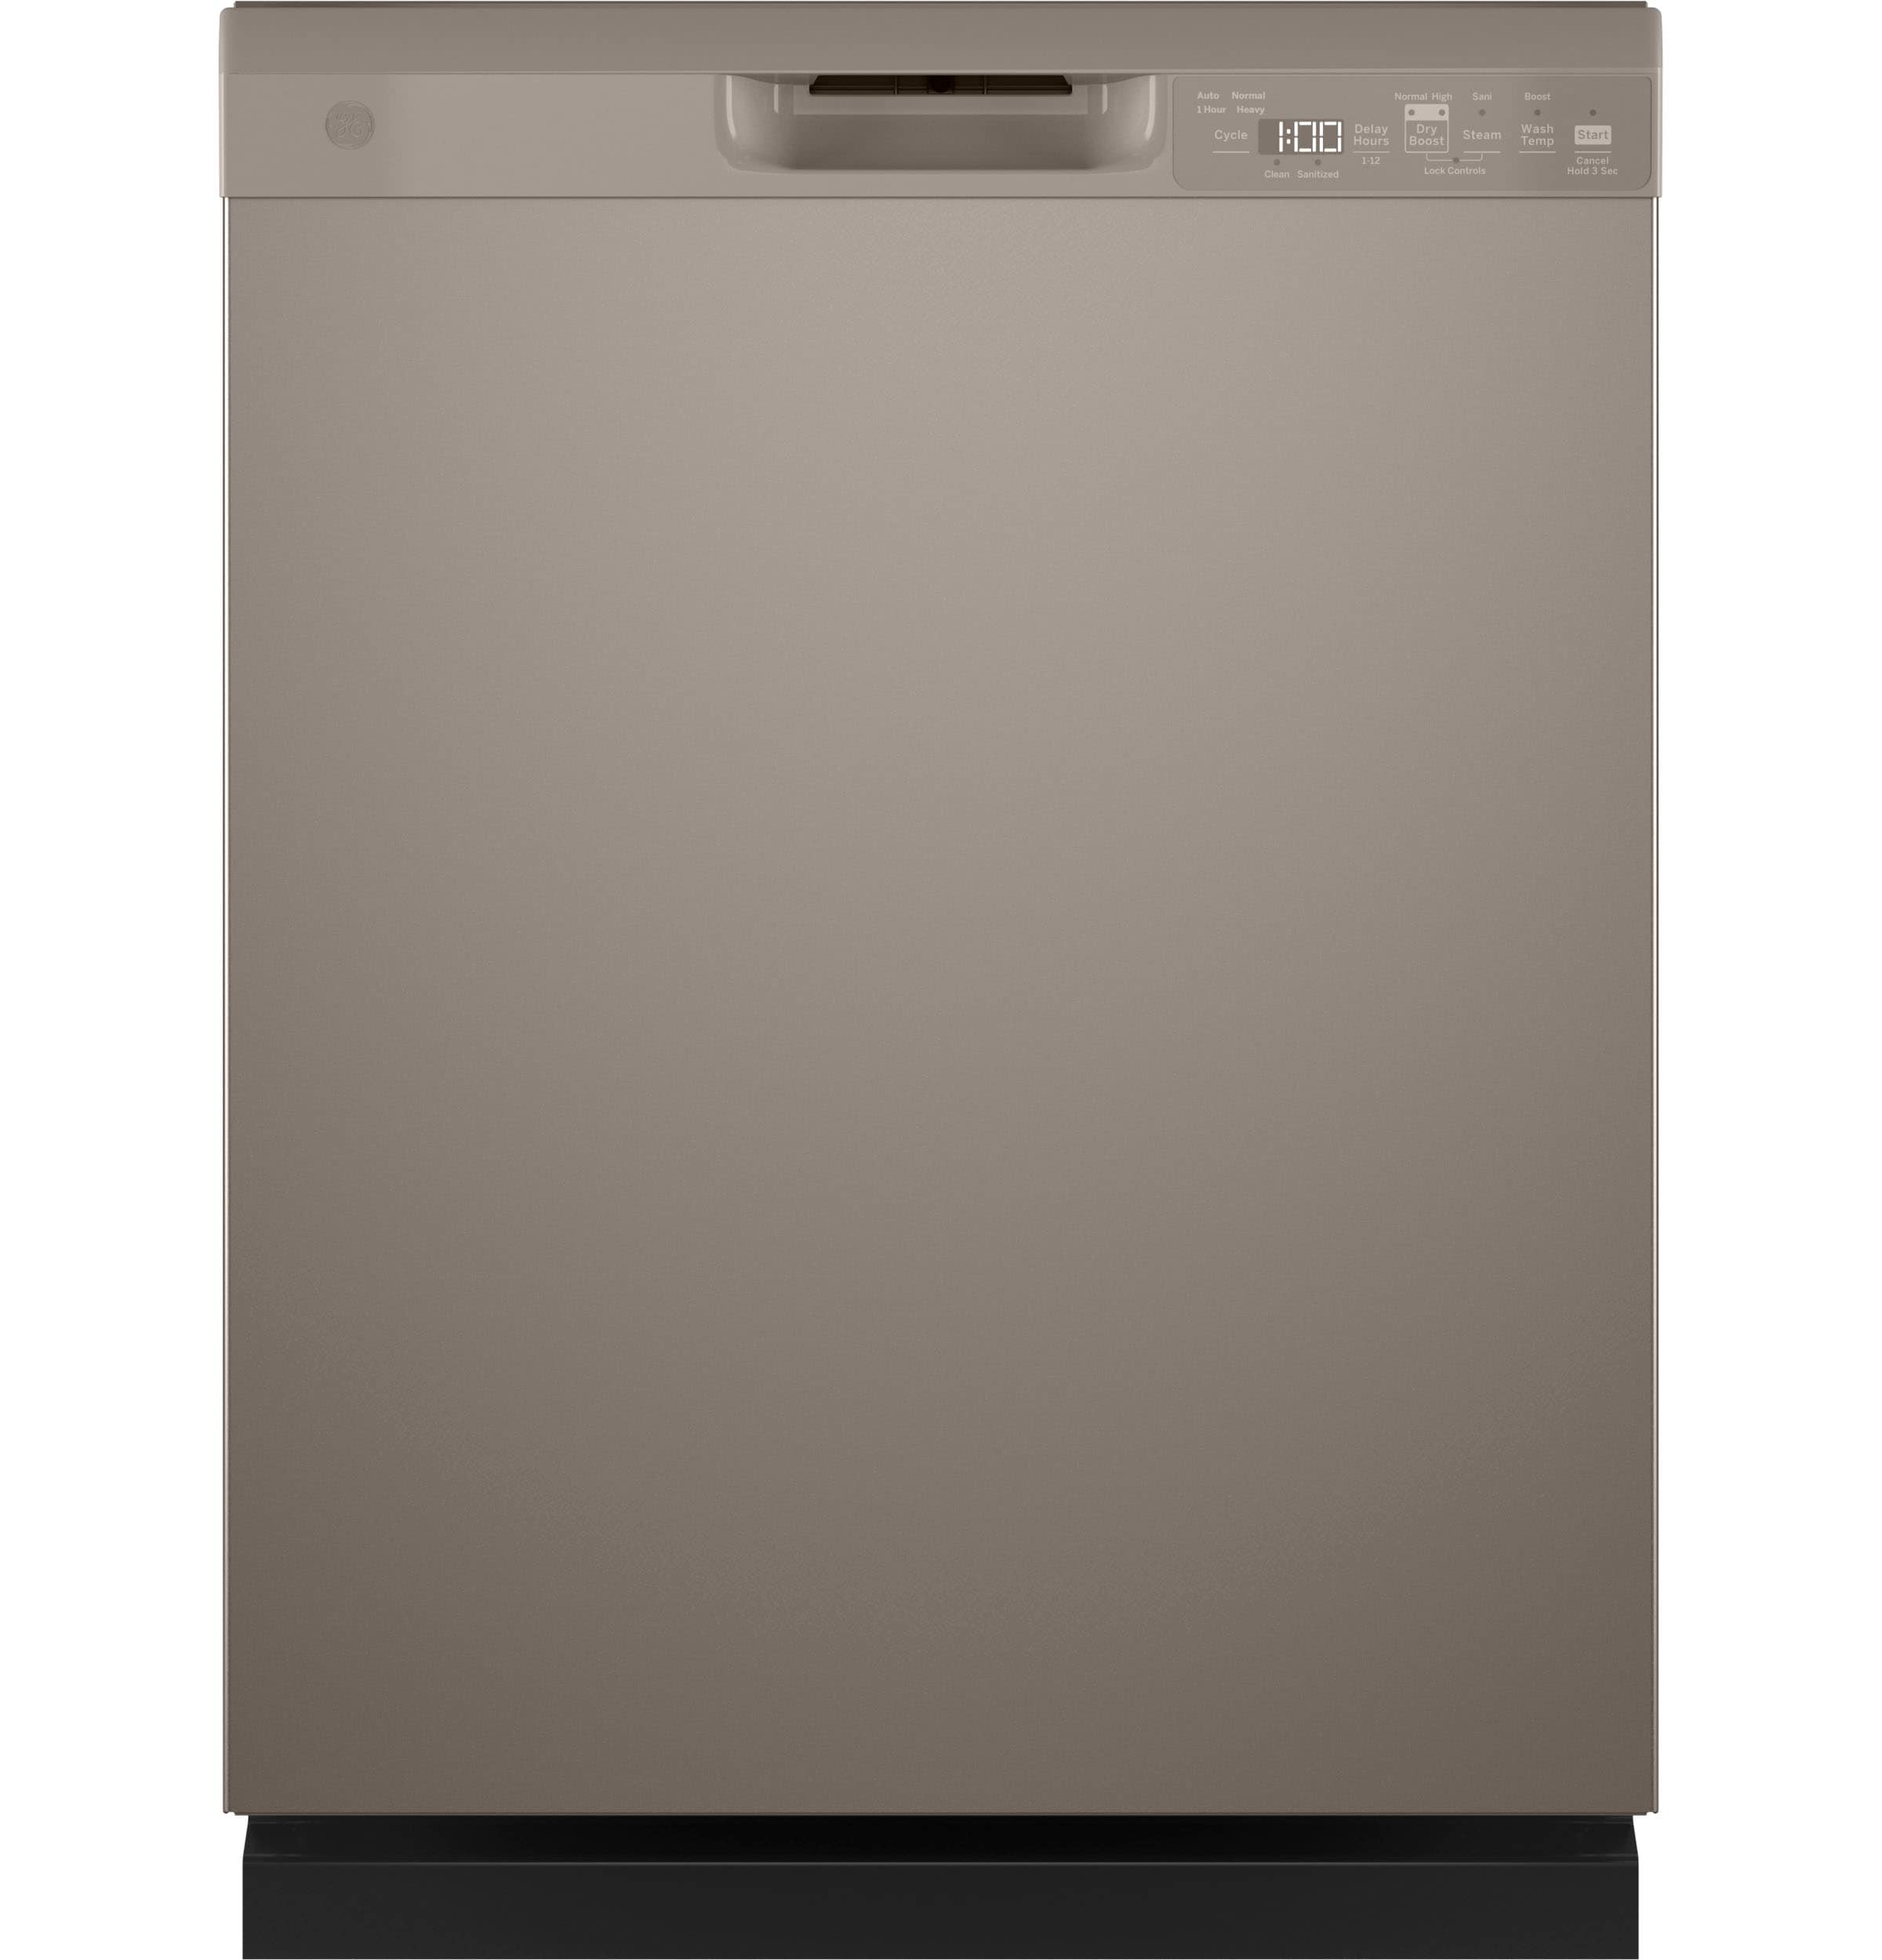 Why Is My Electrolux Dishwasher Not Drying Dishes? - Conner's Appliance